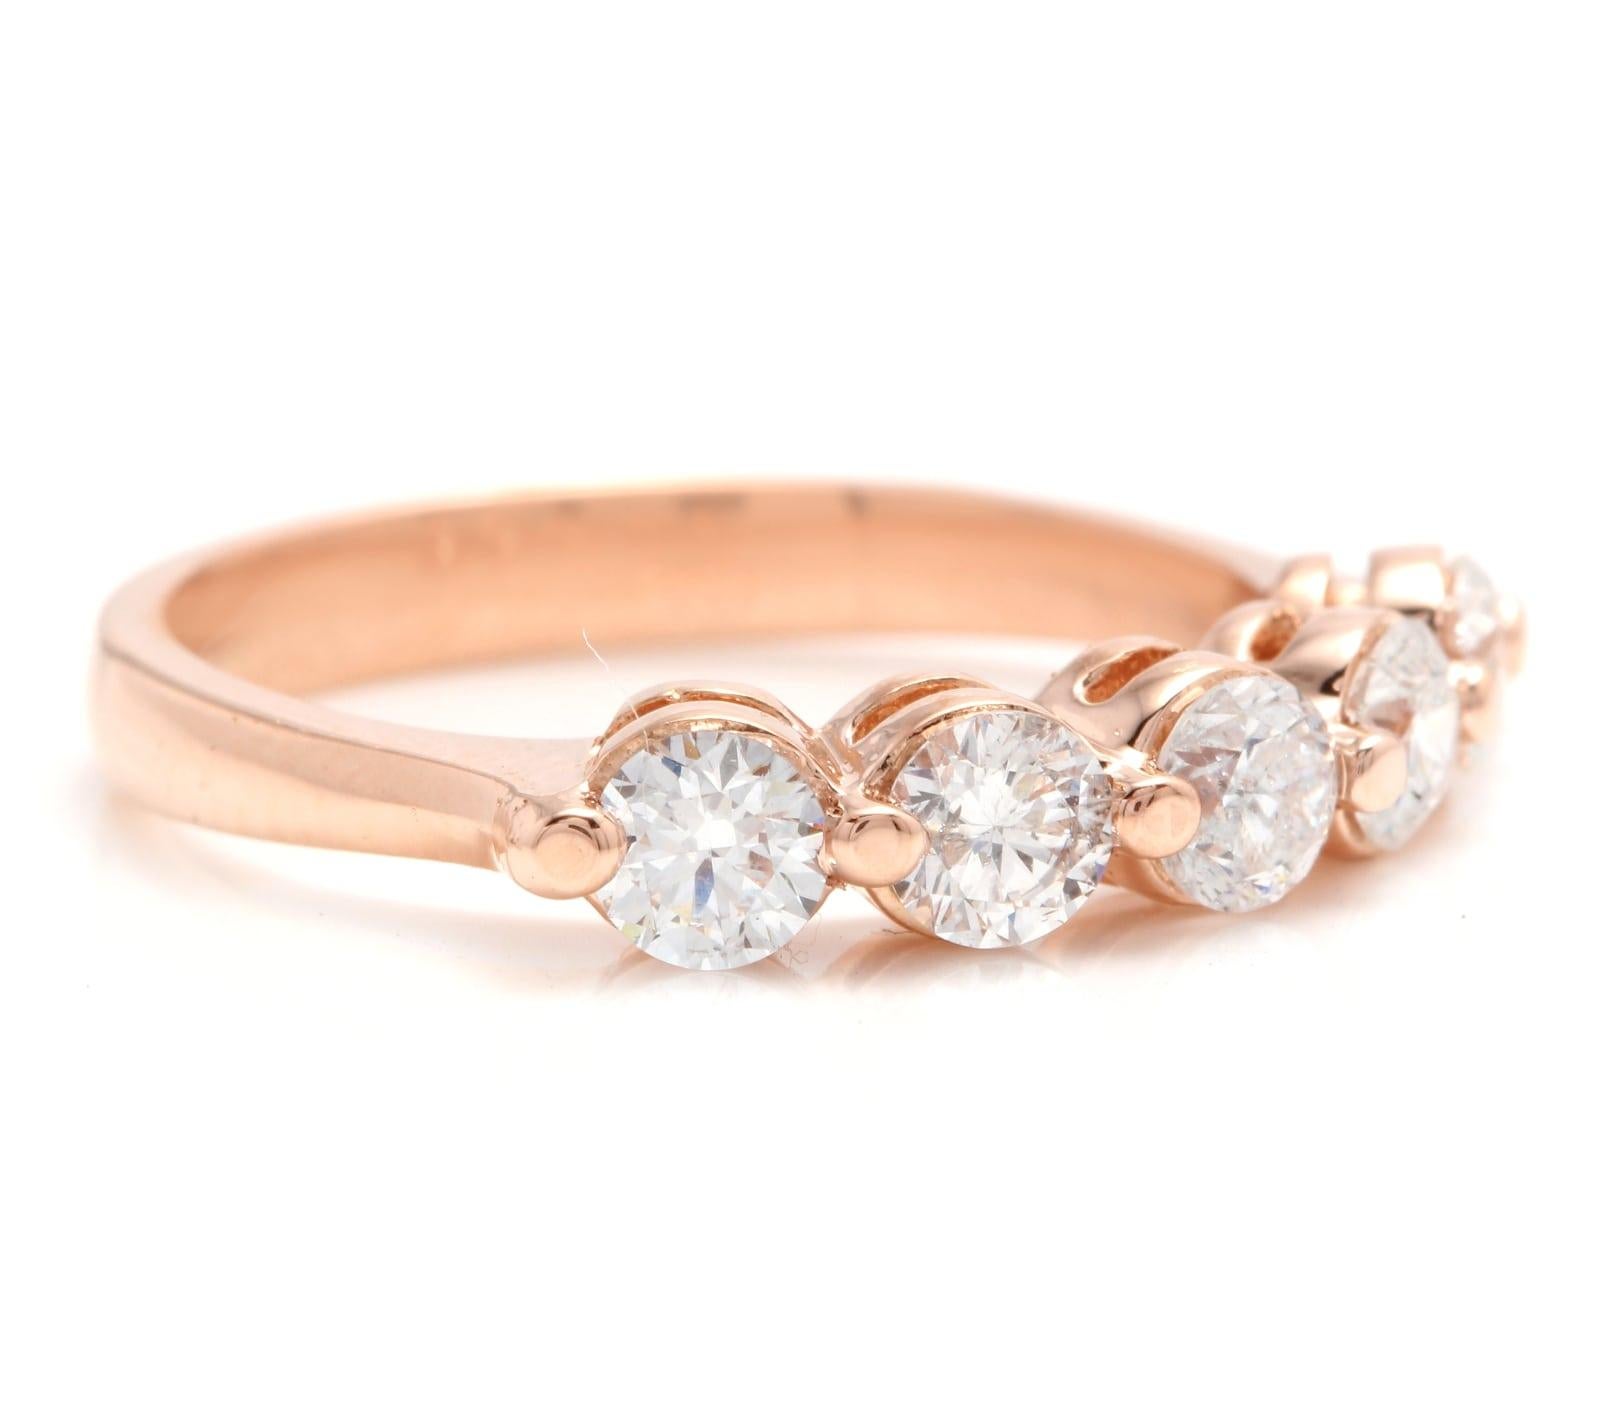 Splendid 0.85 Carats Natural Diamond 14K Solid Rose Gold Ring

Suggested Replacement Value: $6,000.00

Stamped: 14K

Total Natural Round Cut Diamonds Weight: Approx. 0.85 Carats (color H / Clarity SI1-SI2)

The width of the ring is: 3.71mm

Ring